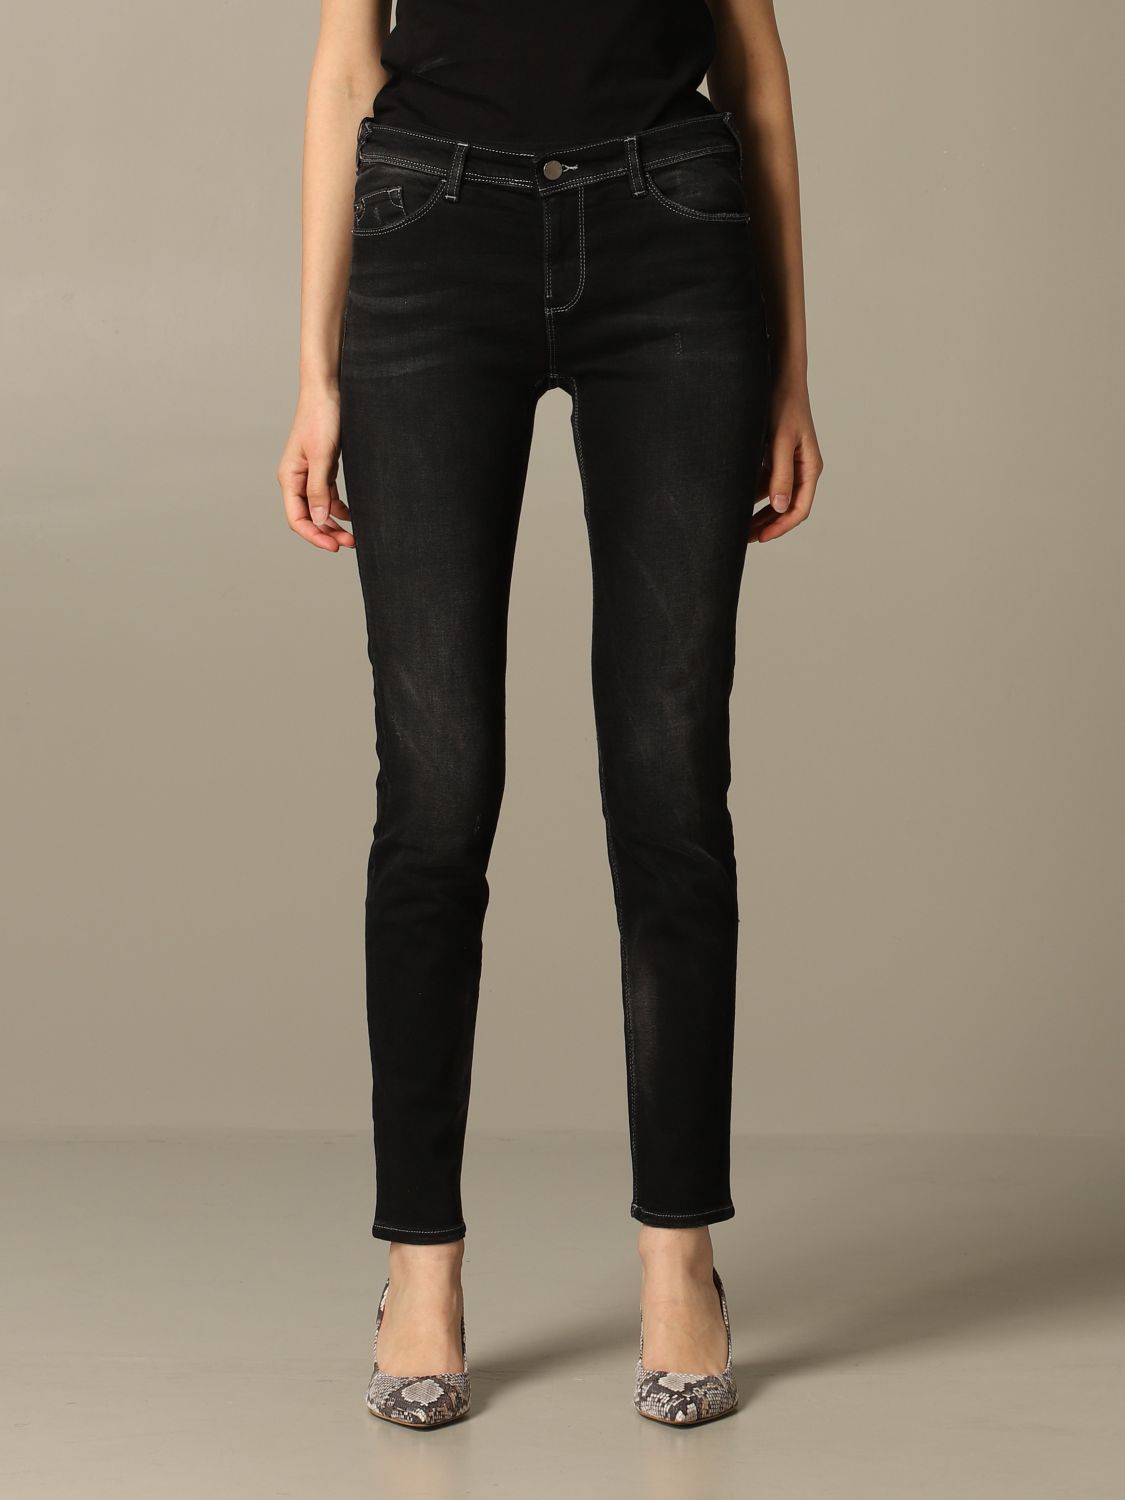 armani jeans for women's